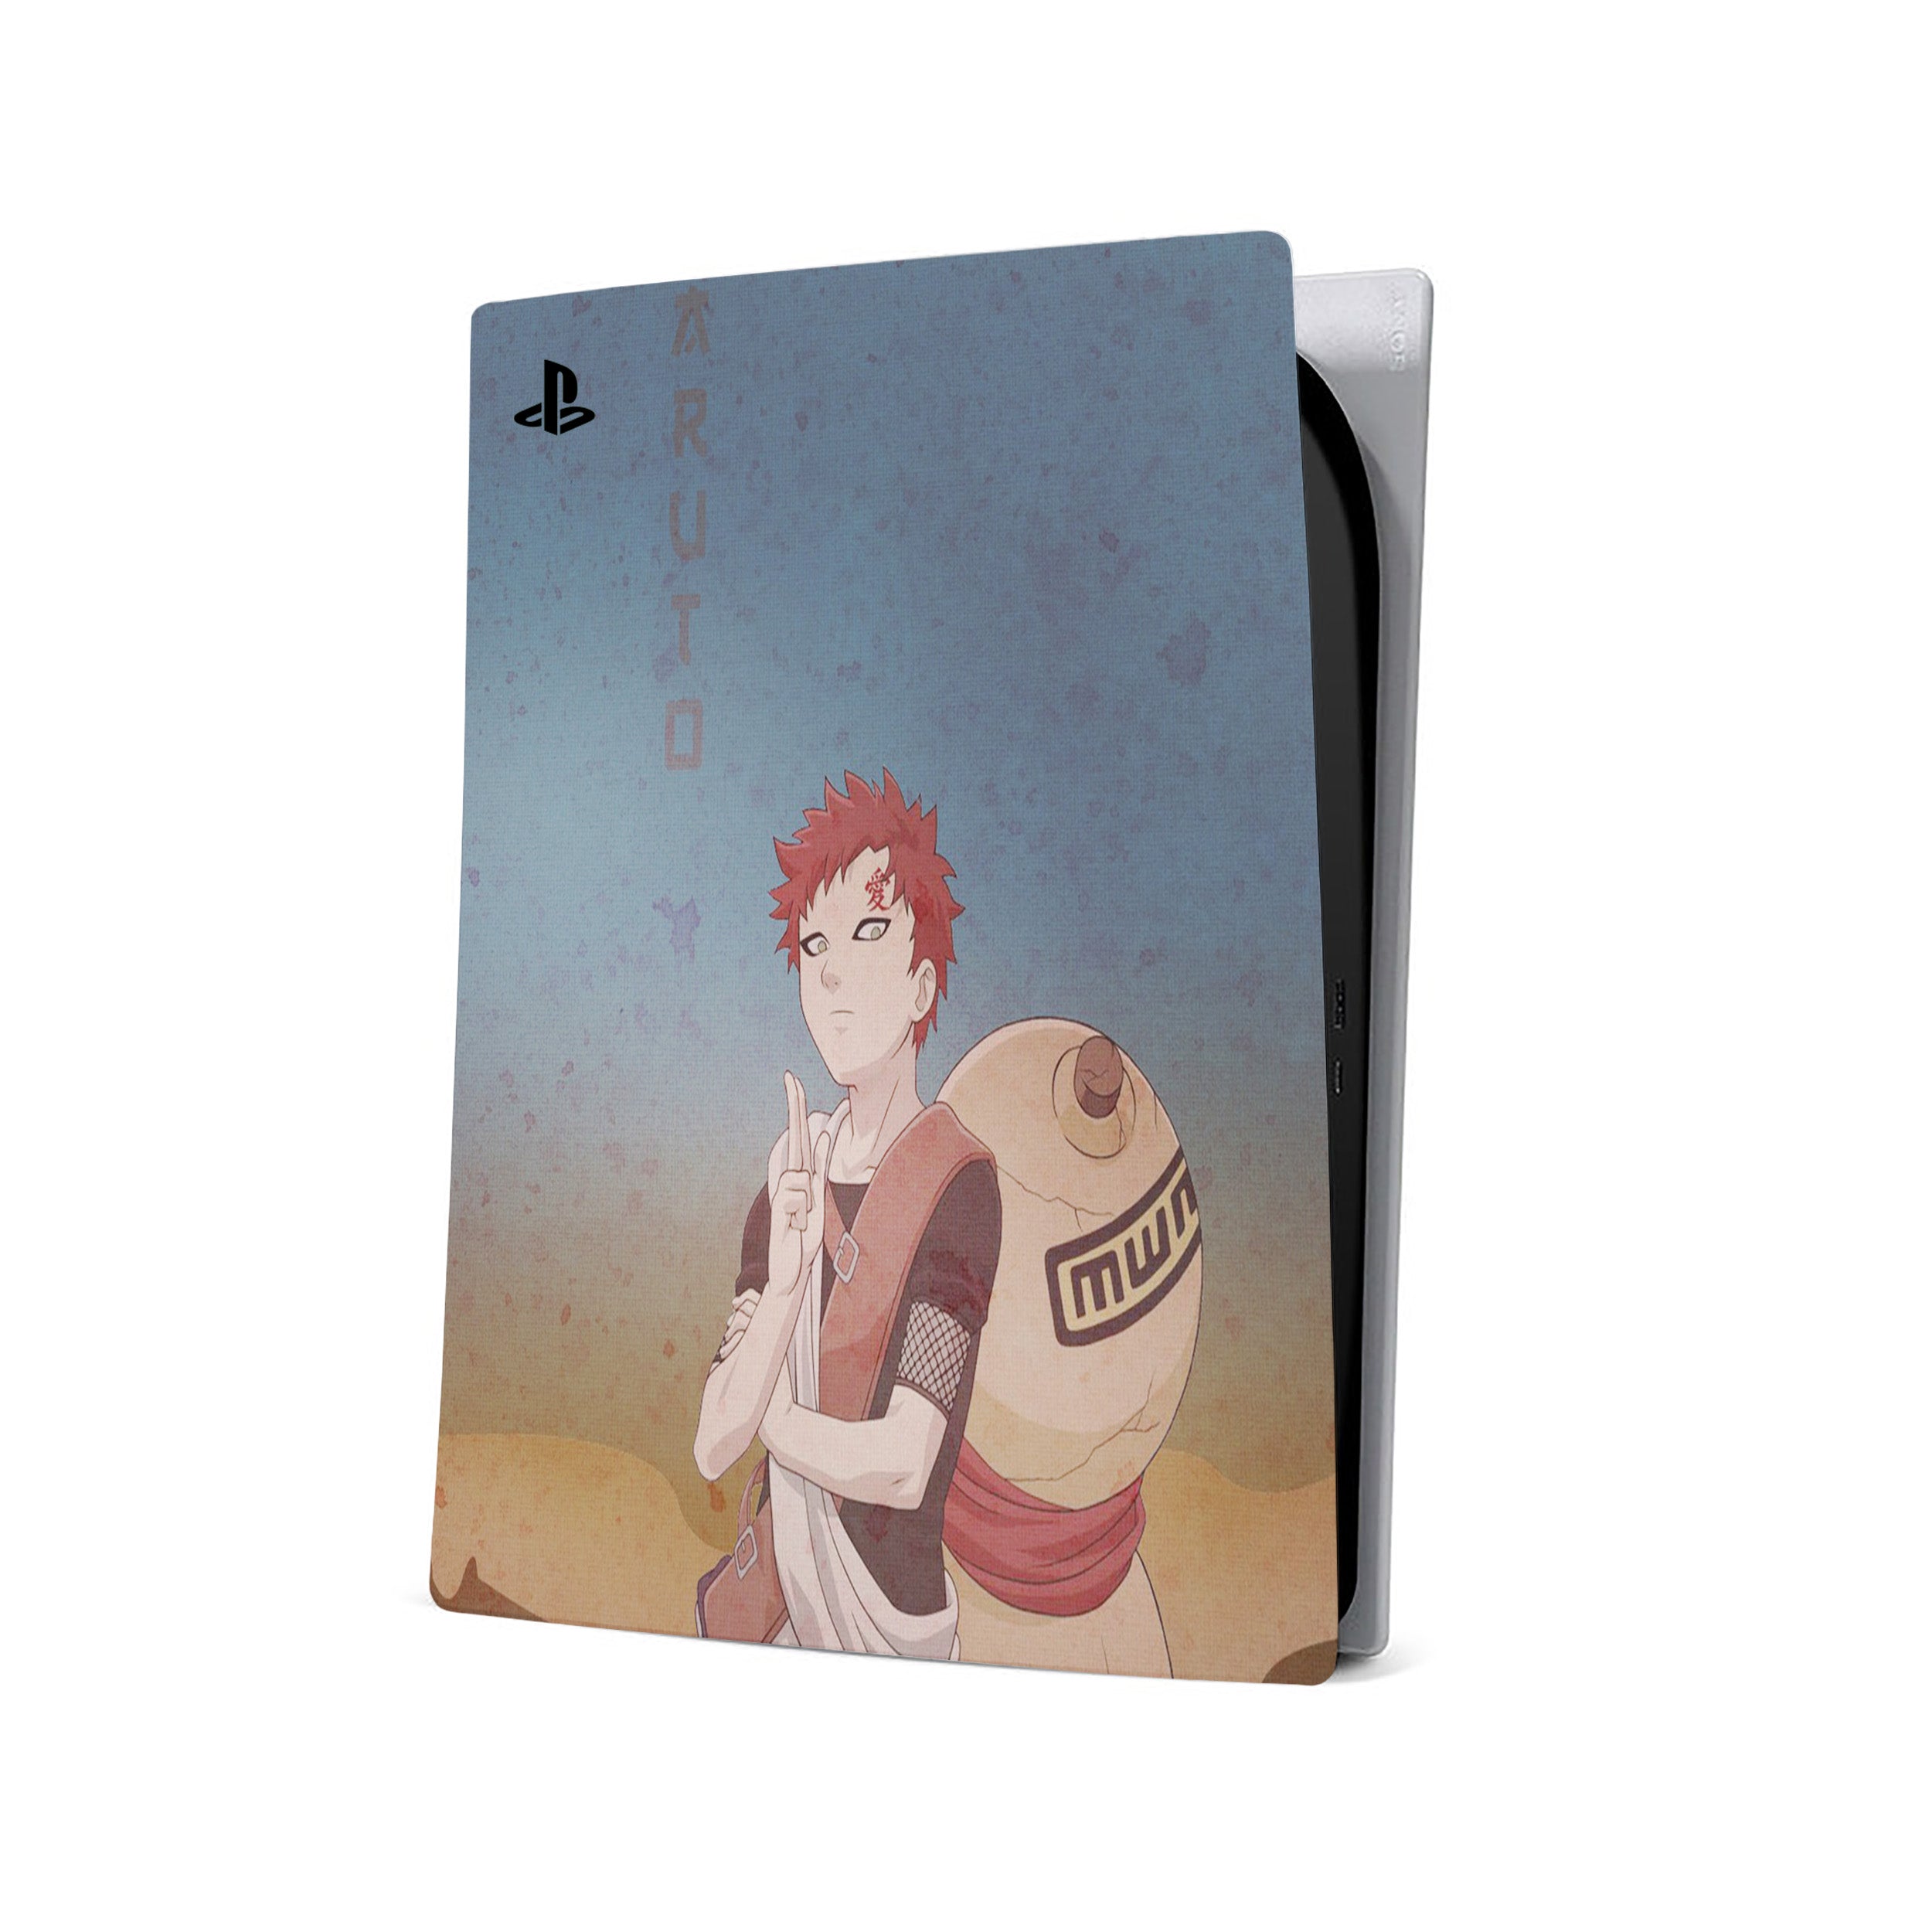 A video game skin featuring a Naruto Gaara design for the PS5.